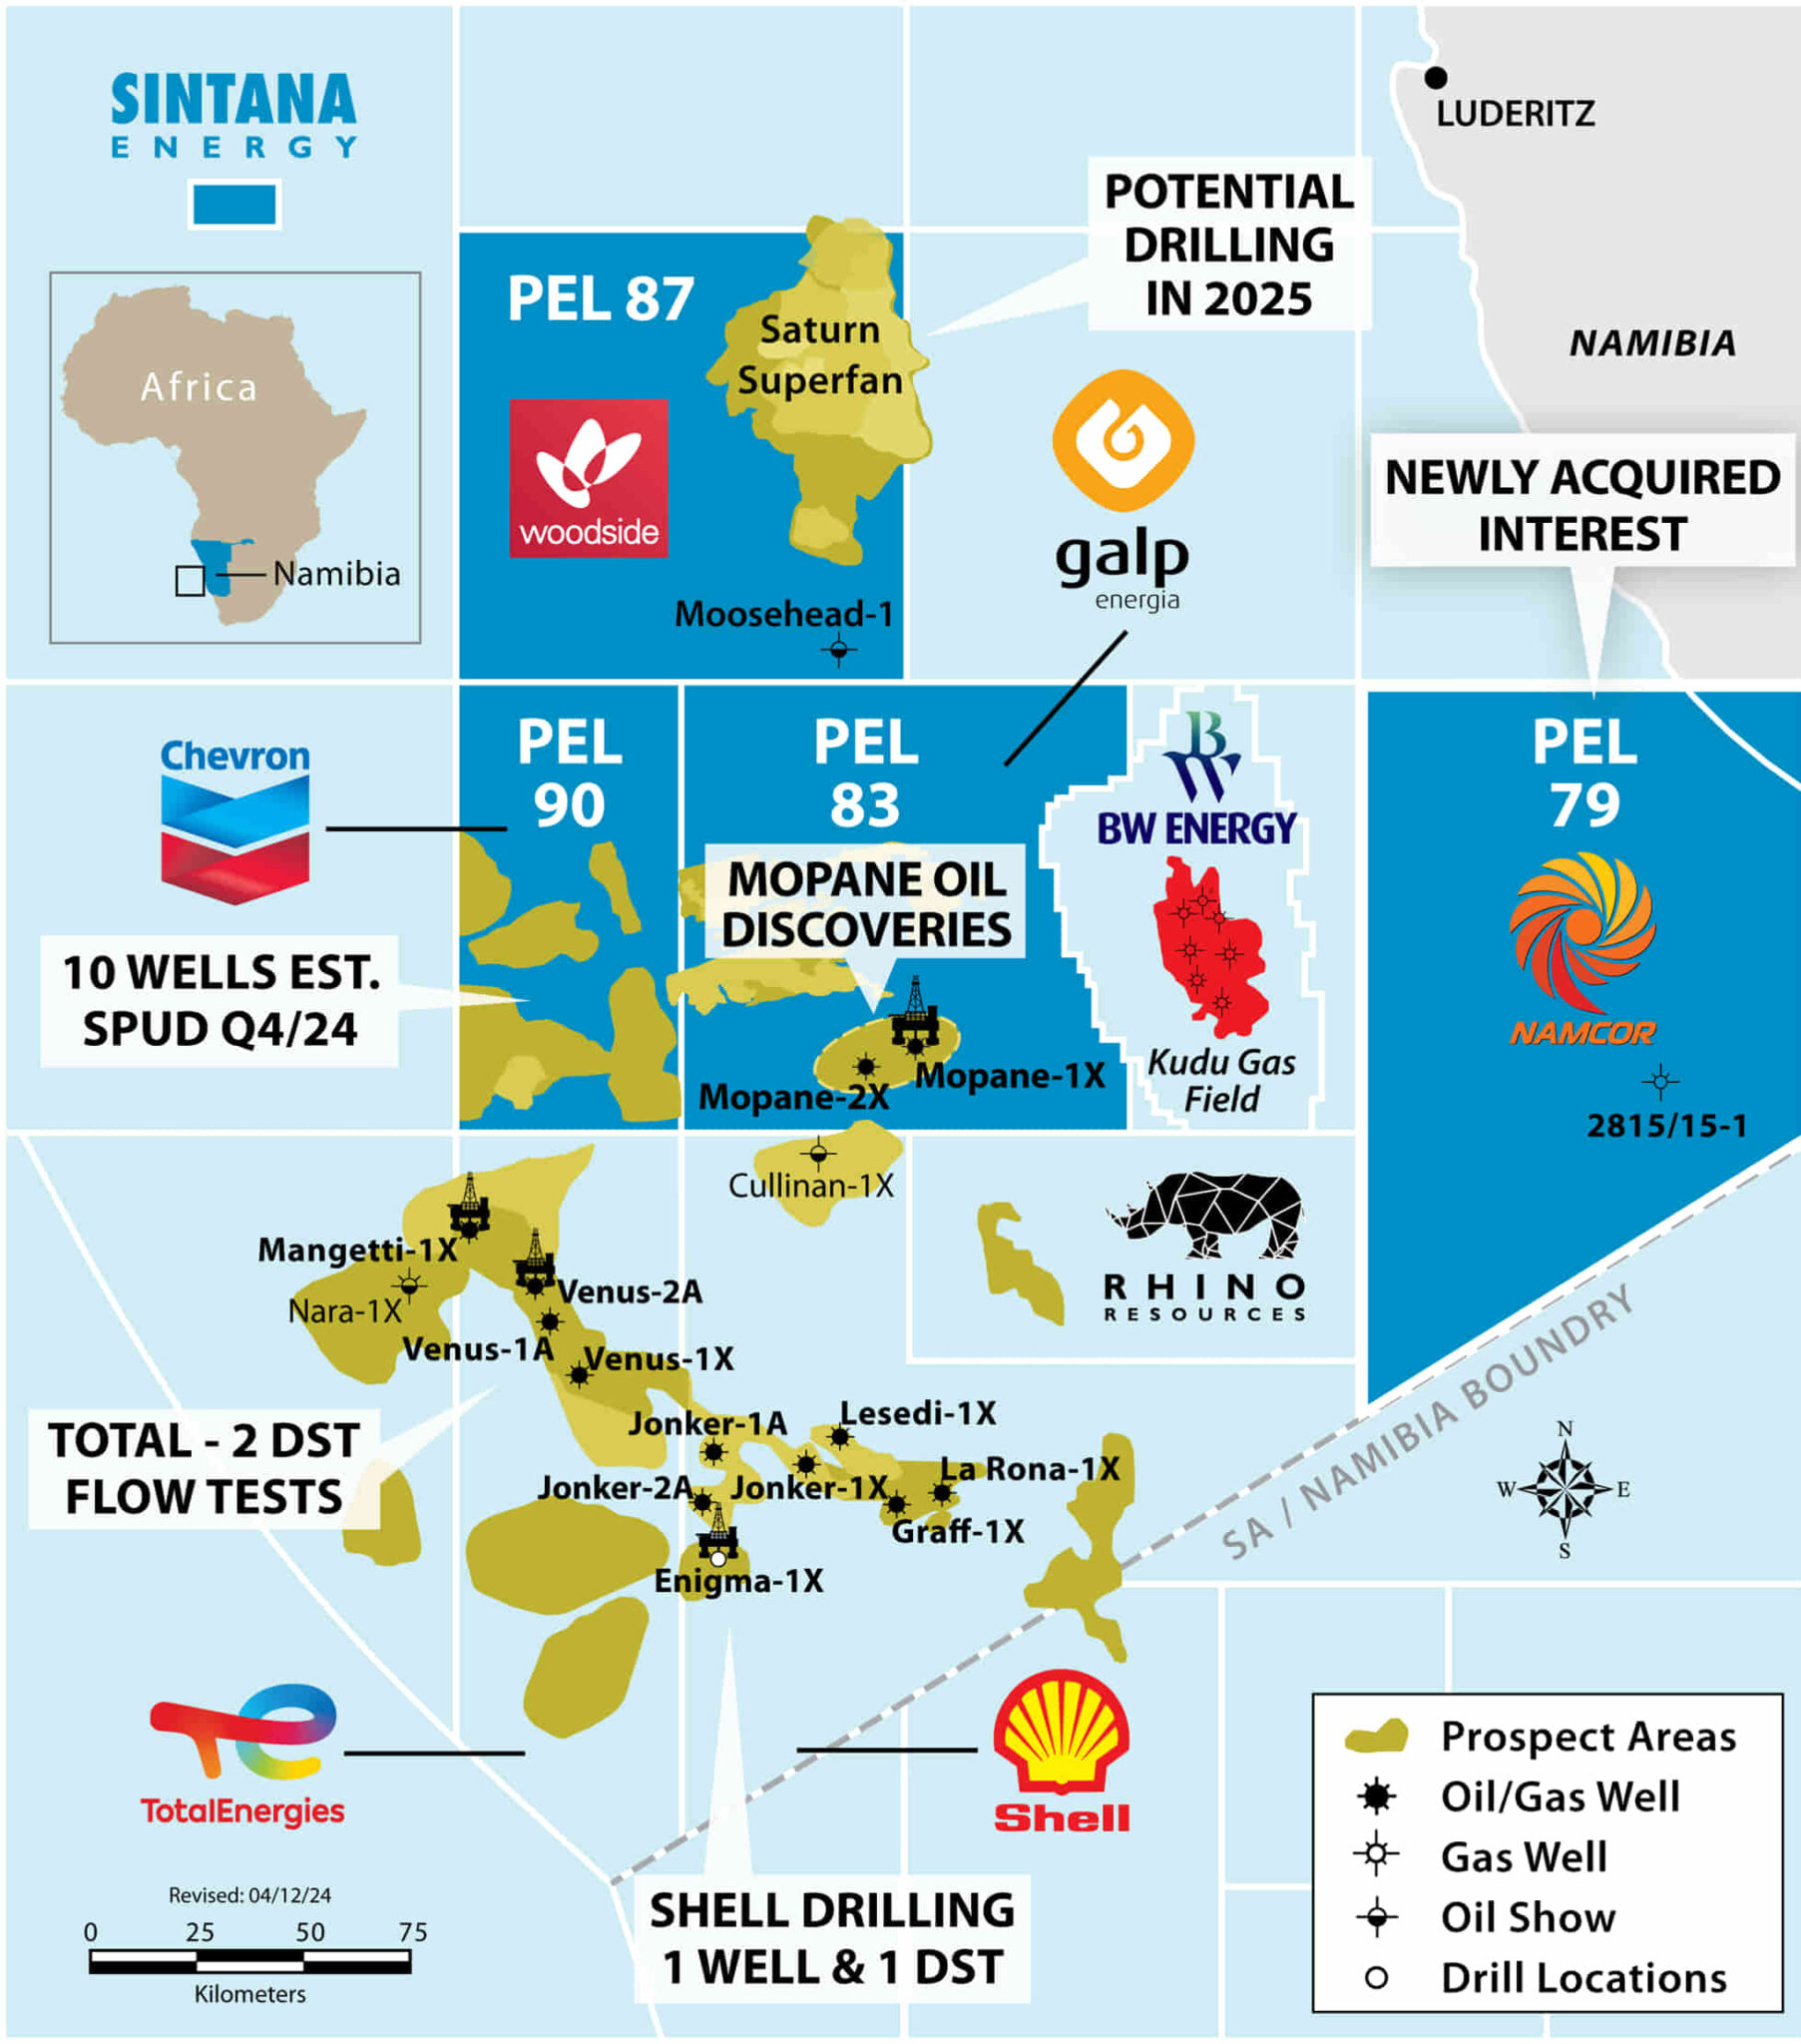 Canadian oil & gas firm widens its footprint in Namibia’s prolific ...